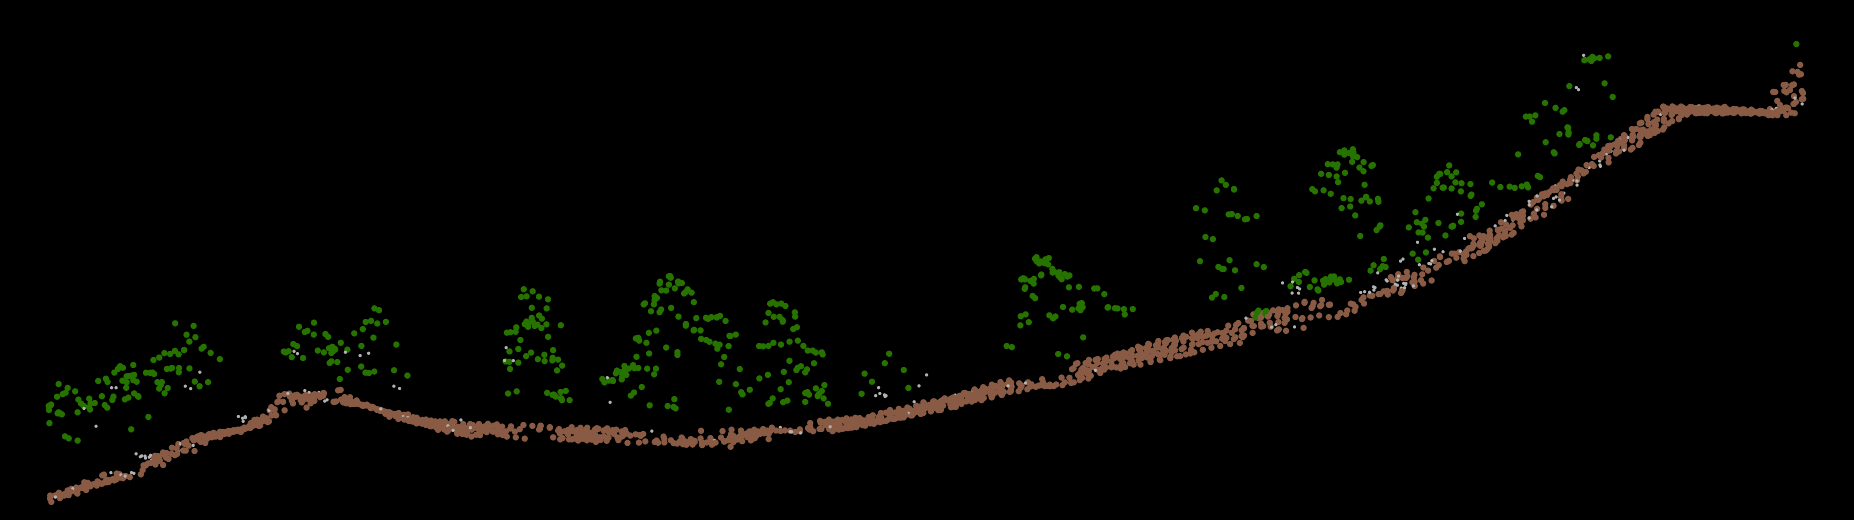 A cross section of 3-dimensional lidar data. Brown points represent ground, green represent vegetation (trees).